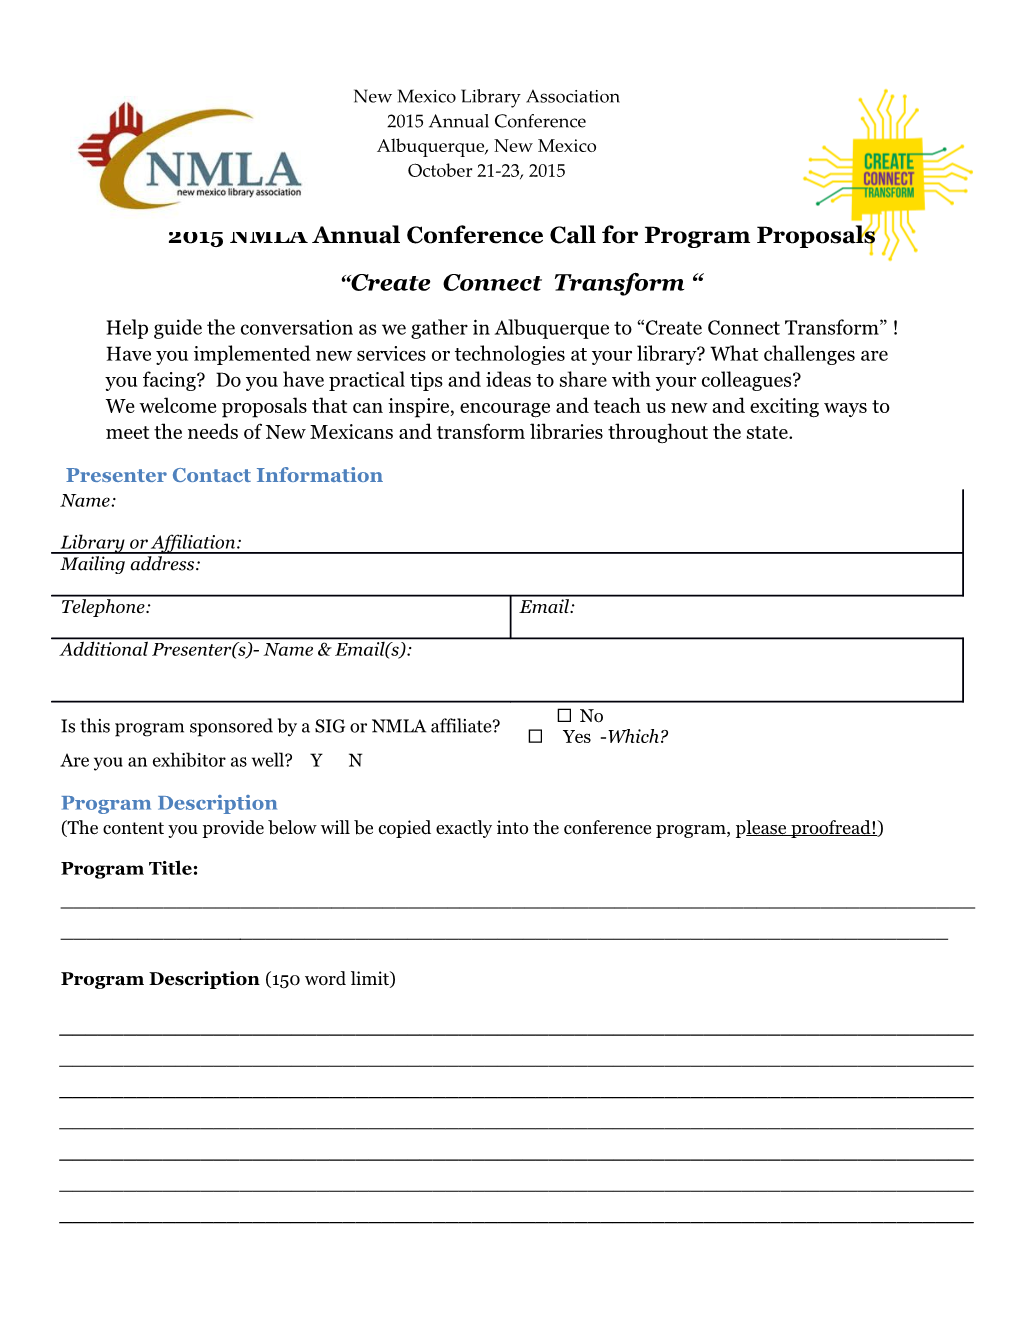 2015 NMLA Annual Conference Call for Program Proposals